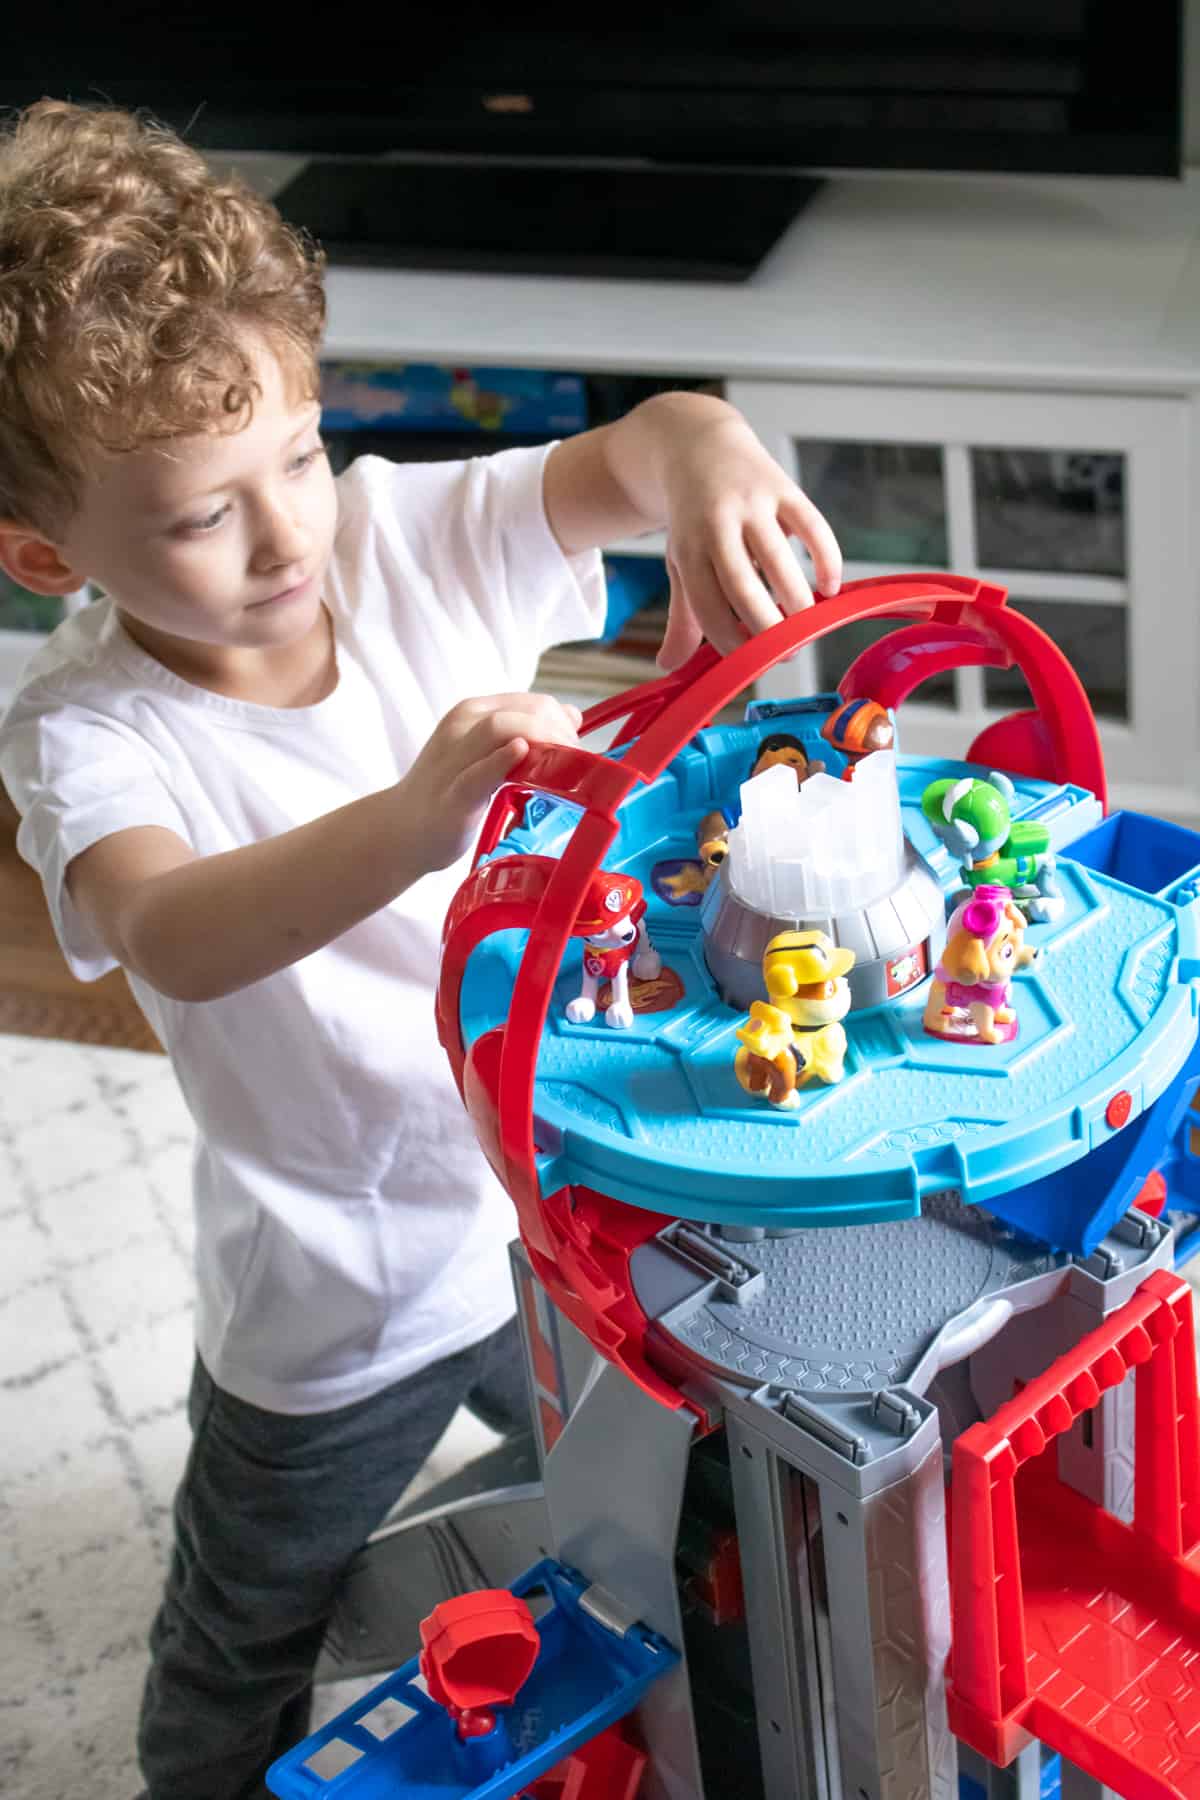 Boy setting up PAW Patrol figures in The Ultimate City Tower Playset